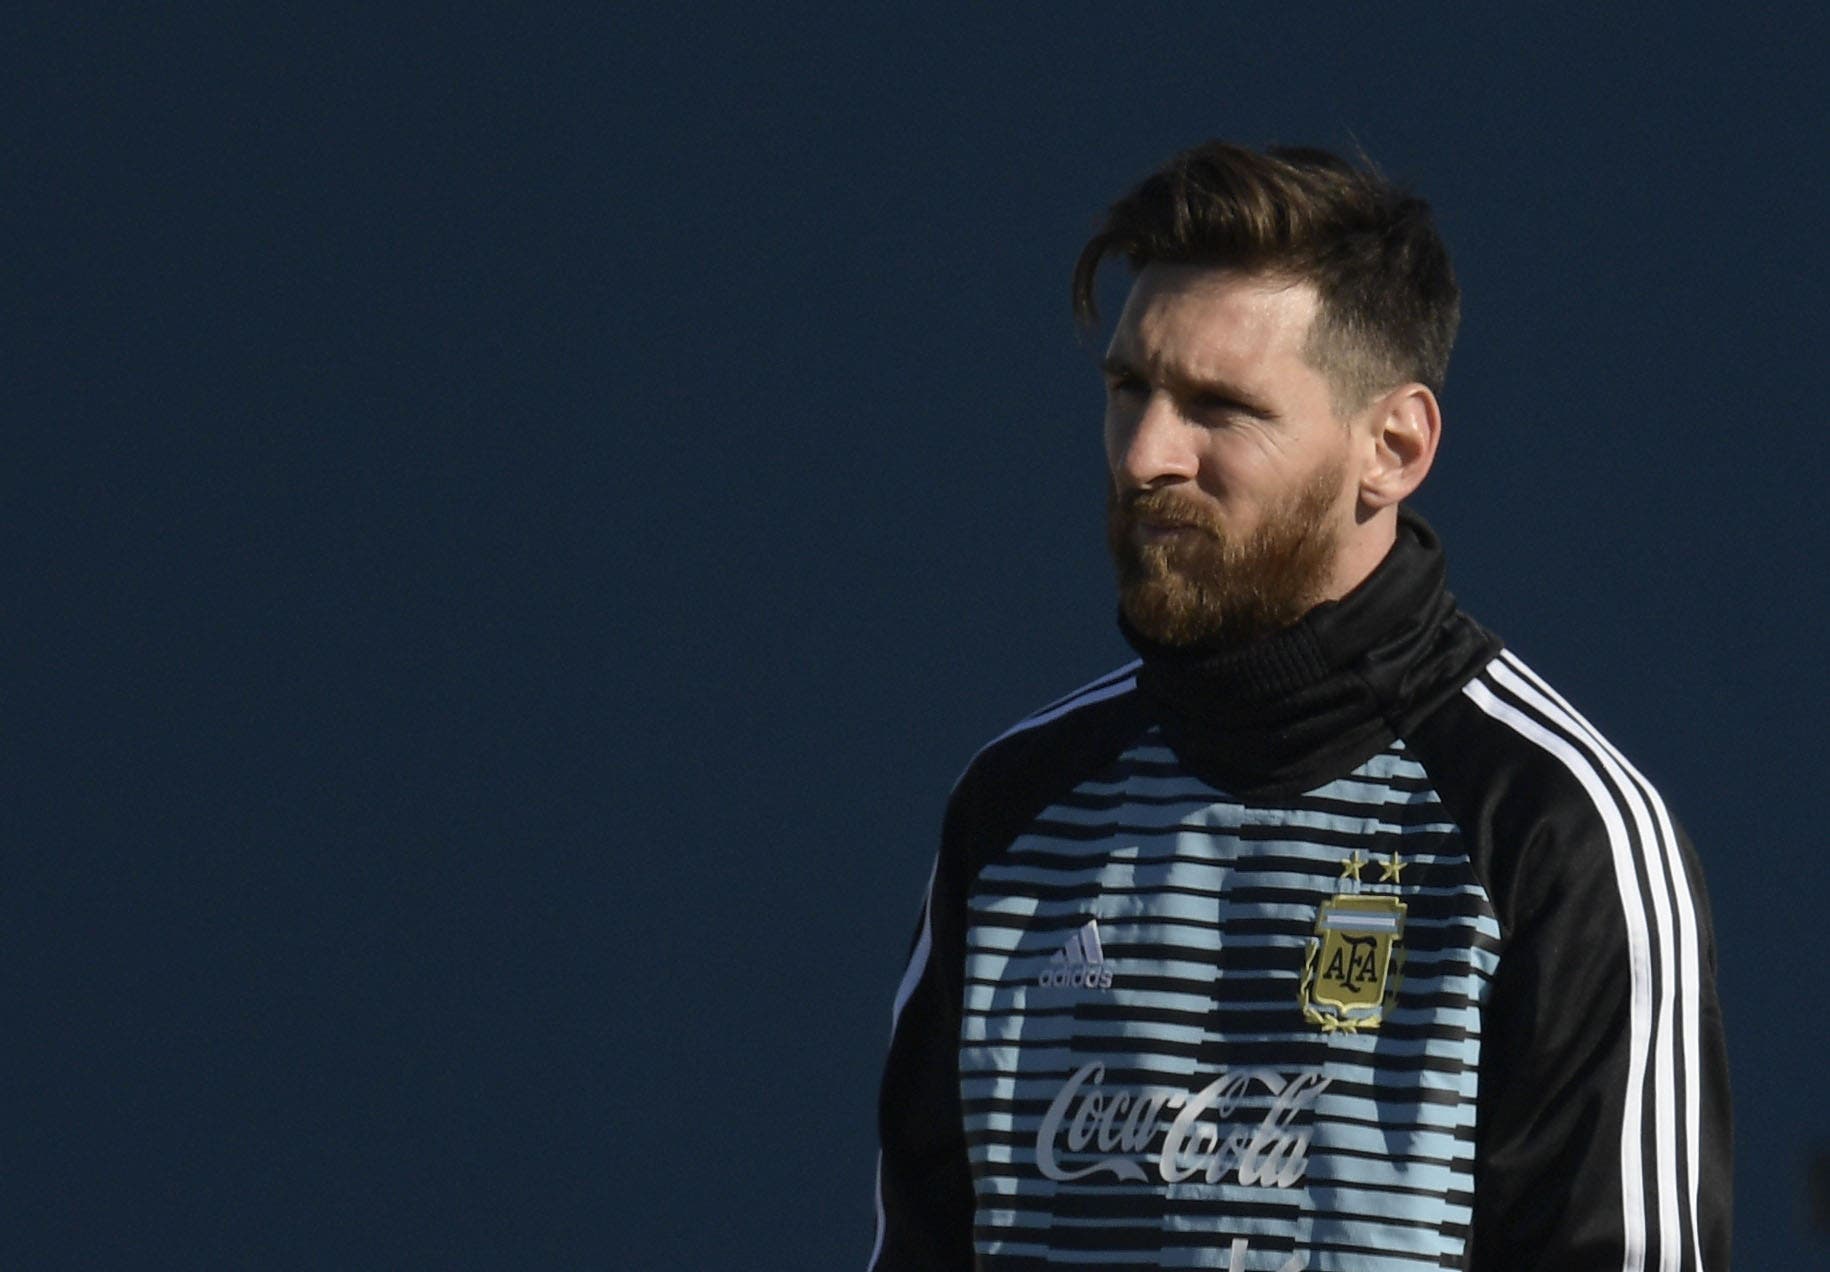 Argentina's football team forward Lionel Messi (R) is pictured, during a training session in Ezeiza, Buenos Aires on May 22, 2018.  The Argentinian team is training ahead of a friendly match against Haiti to be held on May 29 at "La Bombonera" stadium in Buenos Aires, before departing to Barcelona, to prepare for the upcoming FIFA World Cup 2018 in Russia. / AFP / JUAN MABROMATA